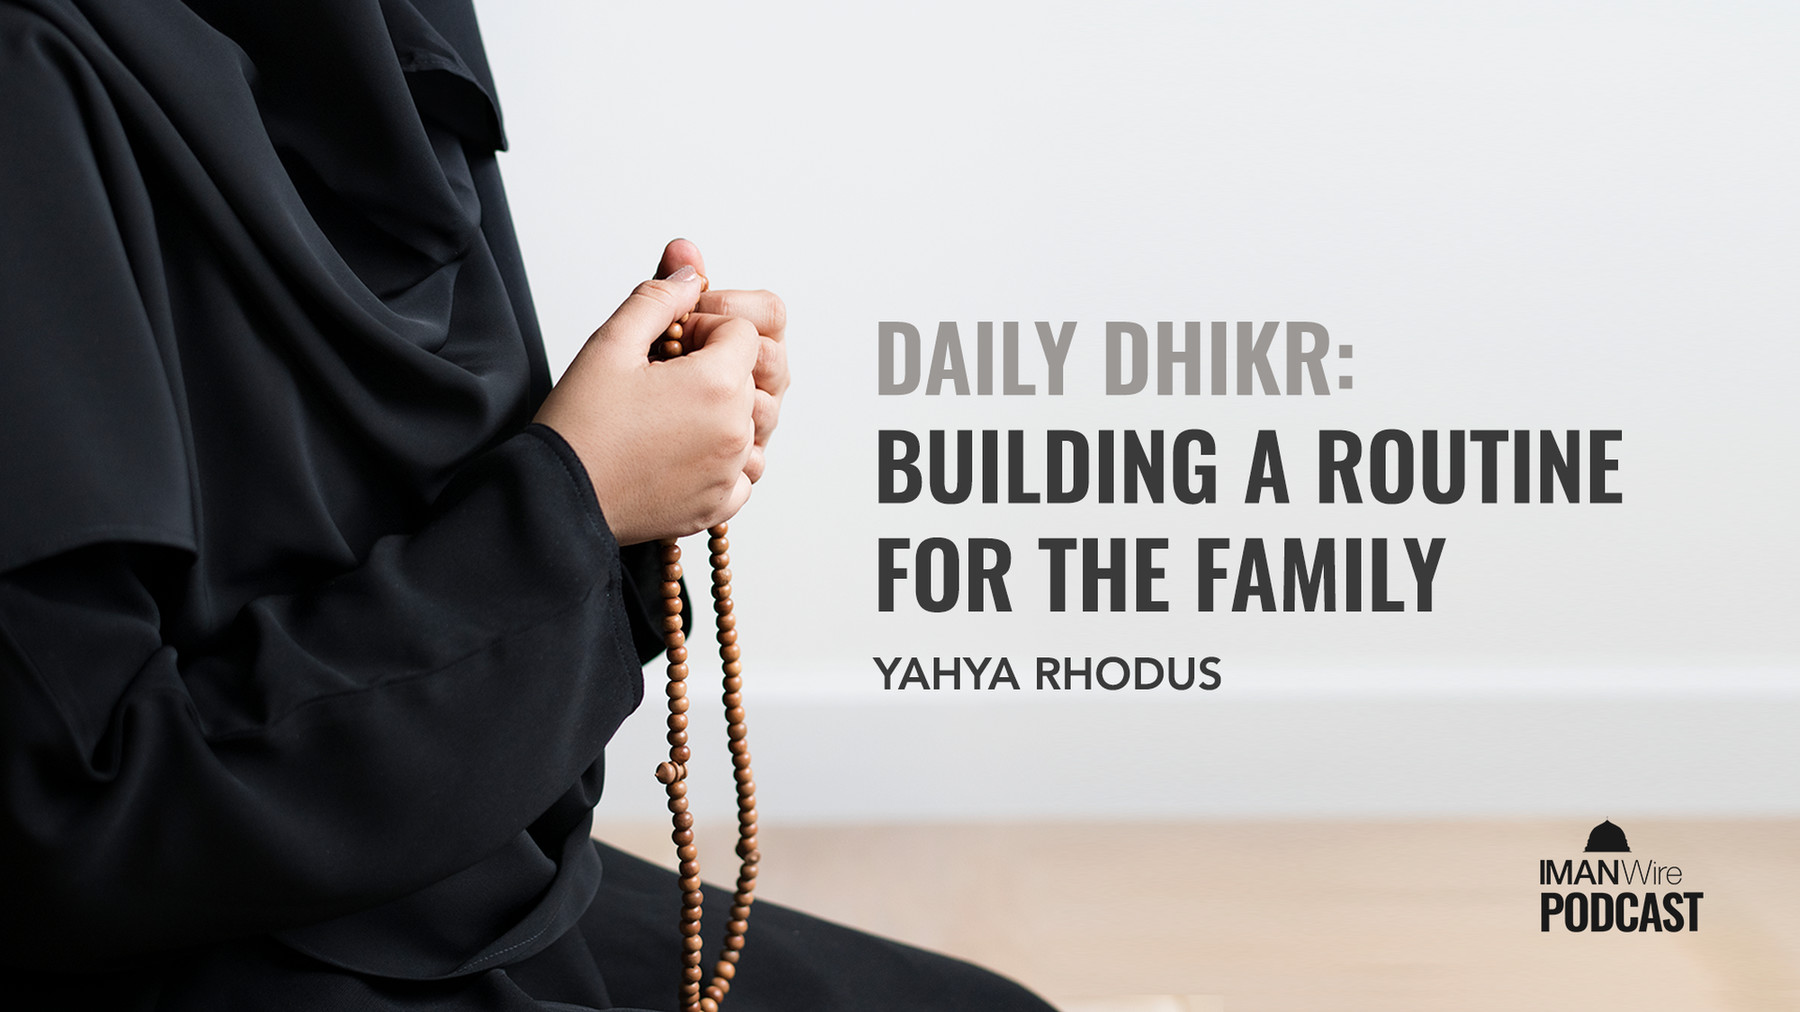 20210104 THUMBNAIL Daily Dhikr Building A Routine for the Family 1920x1080